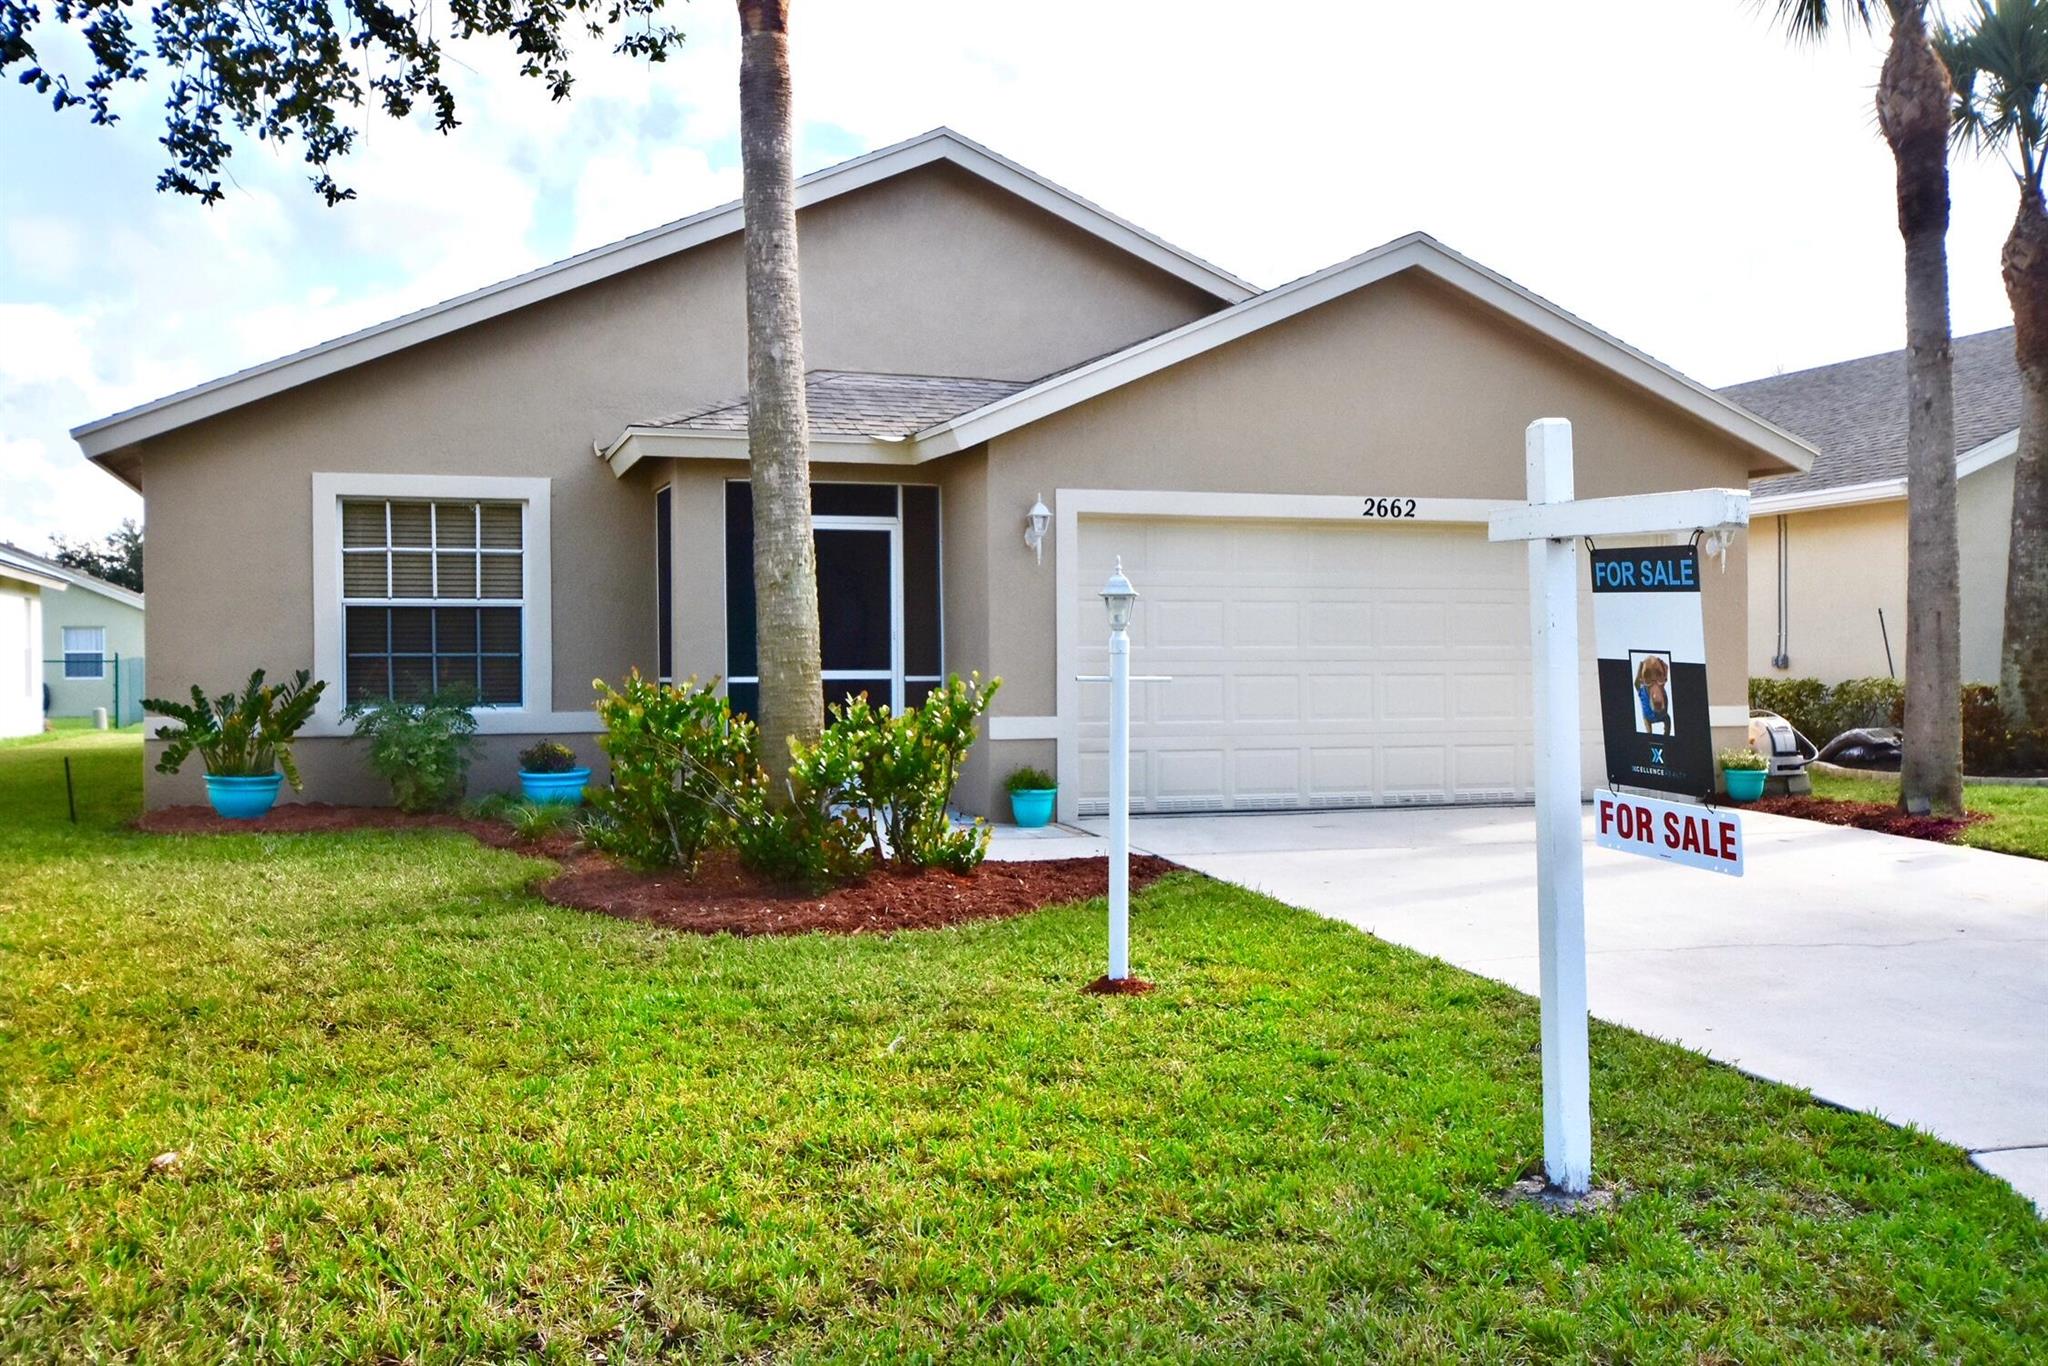 $10,000 credit at close. to buyer. River Forest is friendliest community in Martin County. We welcome All Ages, trucks, golf carts & large dogs of all breeds. Beautiful Home in boating resort community w/low HOA fees. Desirable OPEN SPACIOUS FLOORPLAN. Just painted light & bright. Kitchen w/Corian Countertops, 42' Cabinets, SS Appliances, Double Oven. AC 2018, Water Heater 2017. Large backyard has room for a pool. Generator Hook-up in garage, Home constructed of solid concrete, on peaceful dead-end street, no homes across street. HOA fee 165 a month includes basic cable, HS internet, Clubhouse w/heated lap pool,workout rm,party rm.Great Schools: Crystal Lake has pre-K program, South Fork has IB Program. RV/boat storage $30/month, community boat ramp in St lucie river, leads to Ocean.